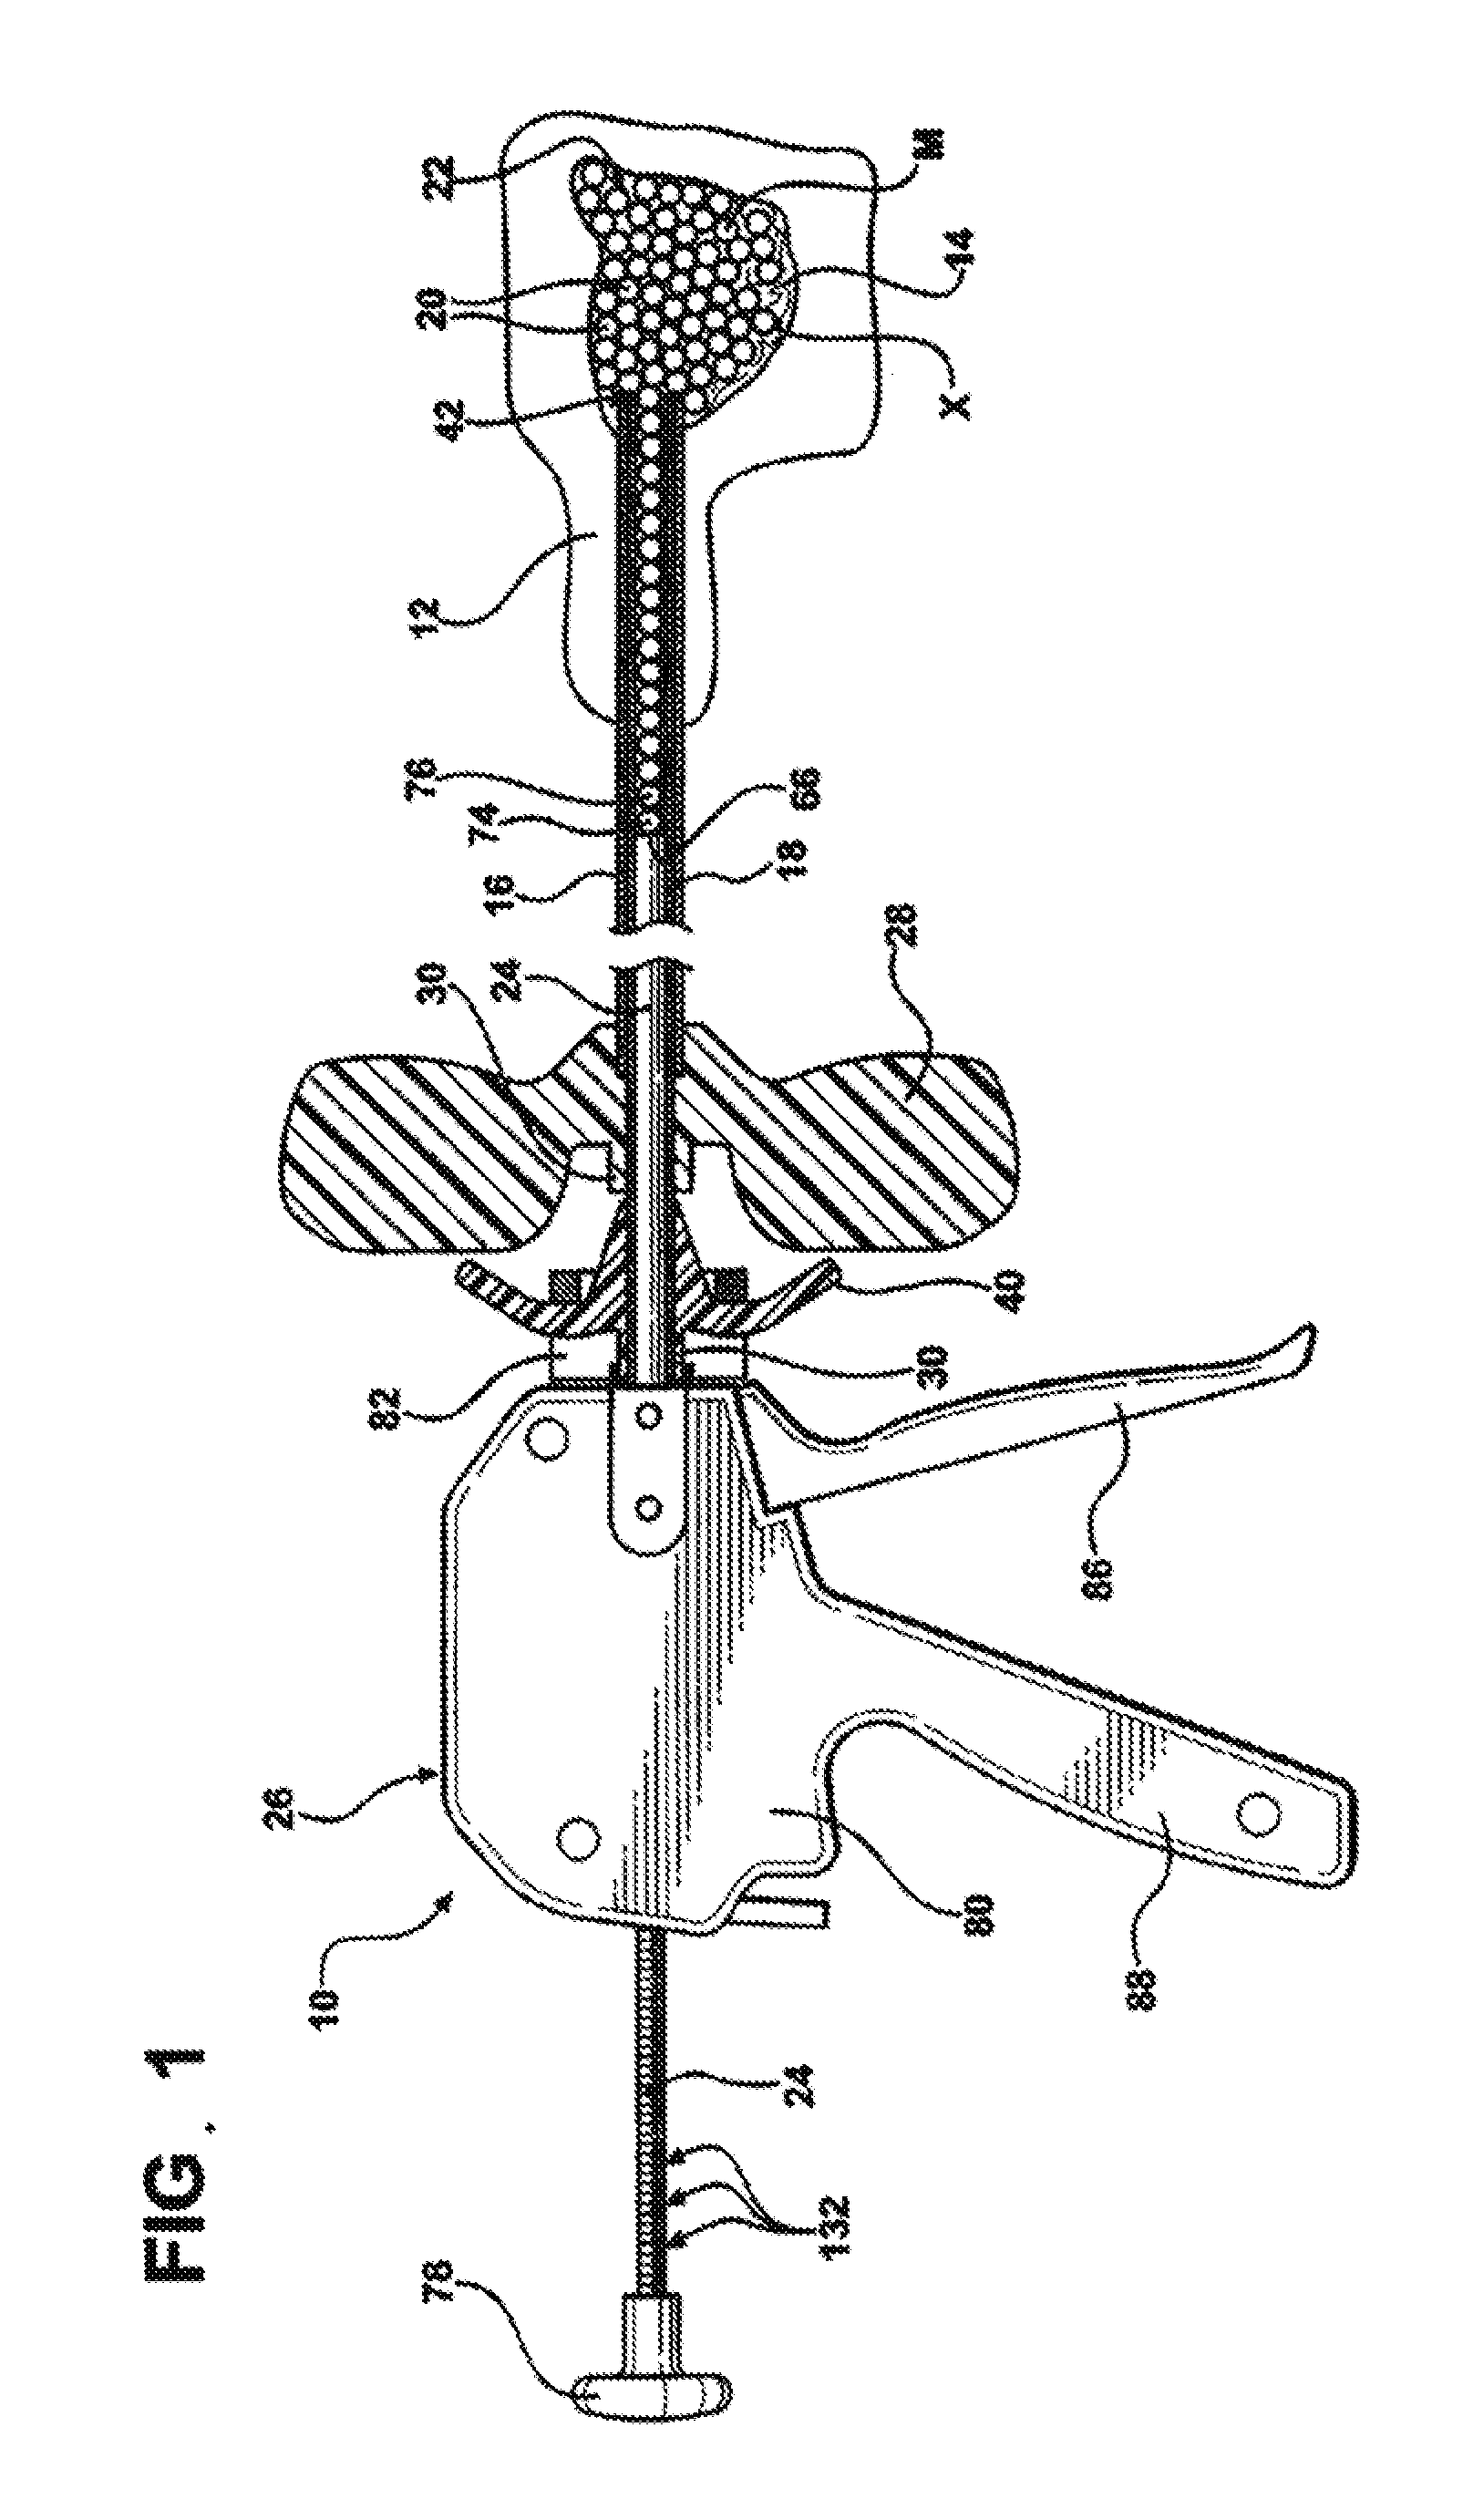 System and method for deliverying an agglomeration of solid beads and cement to the interior of a bone in order to form an implant within the bone